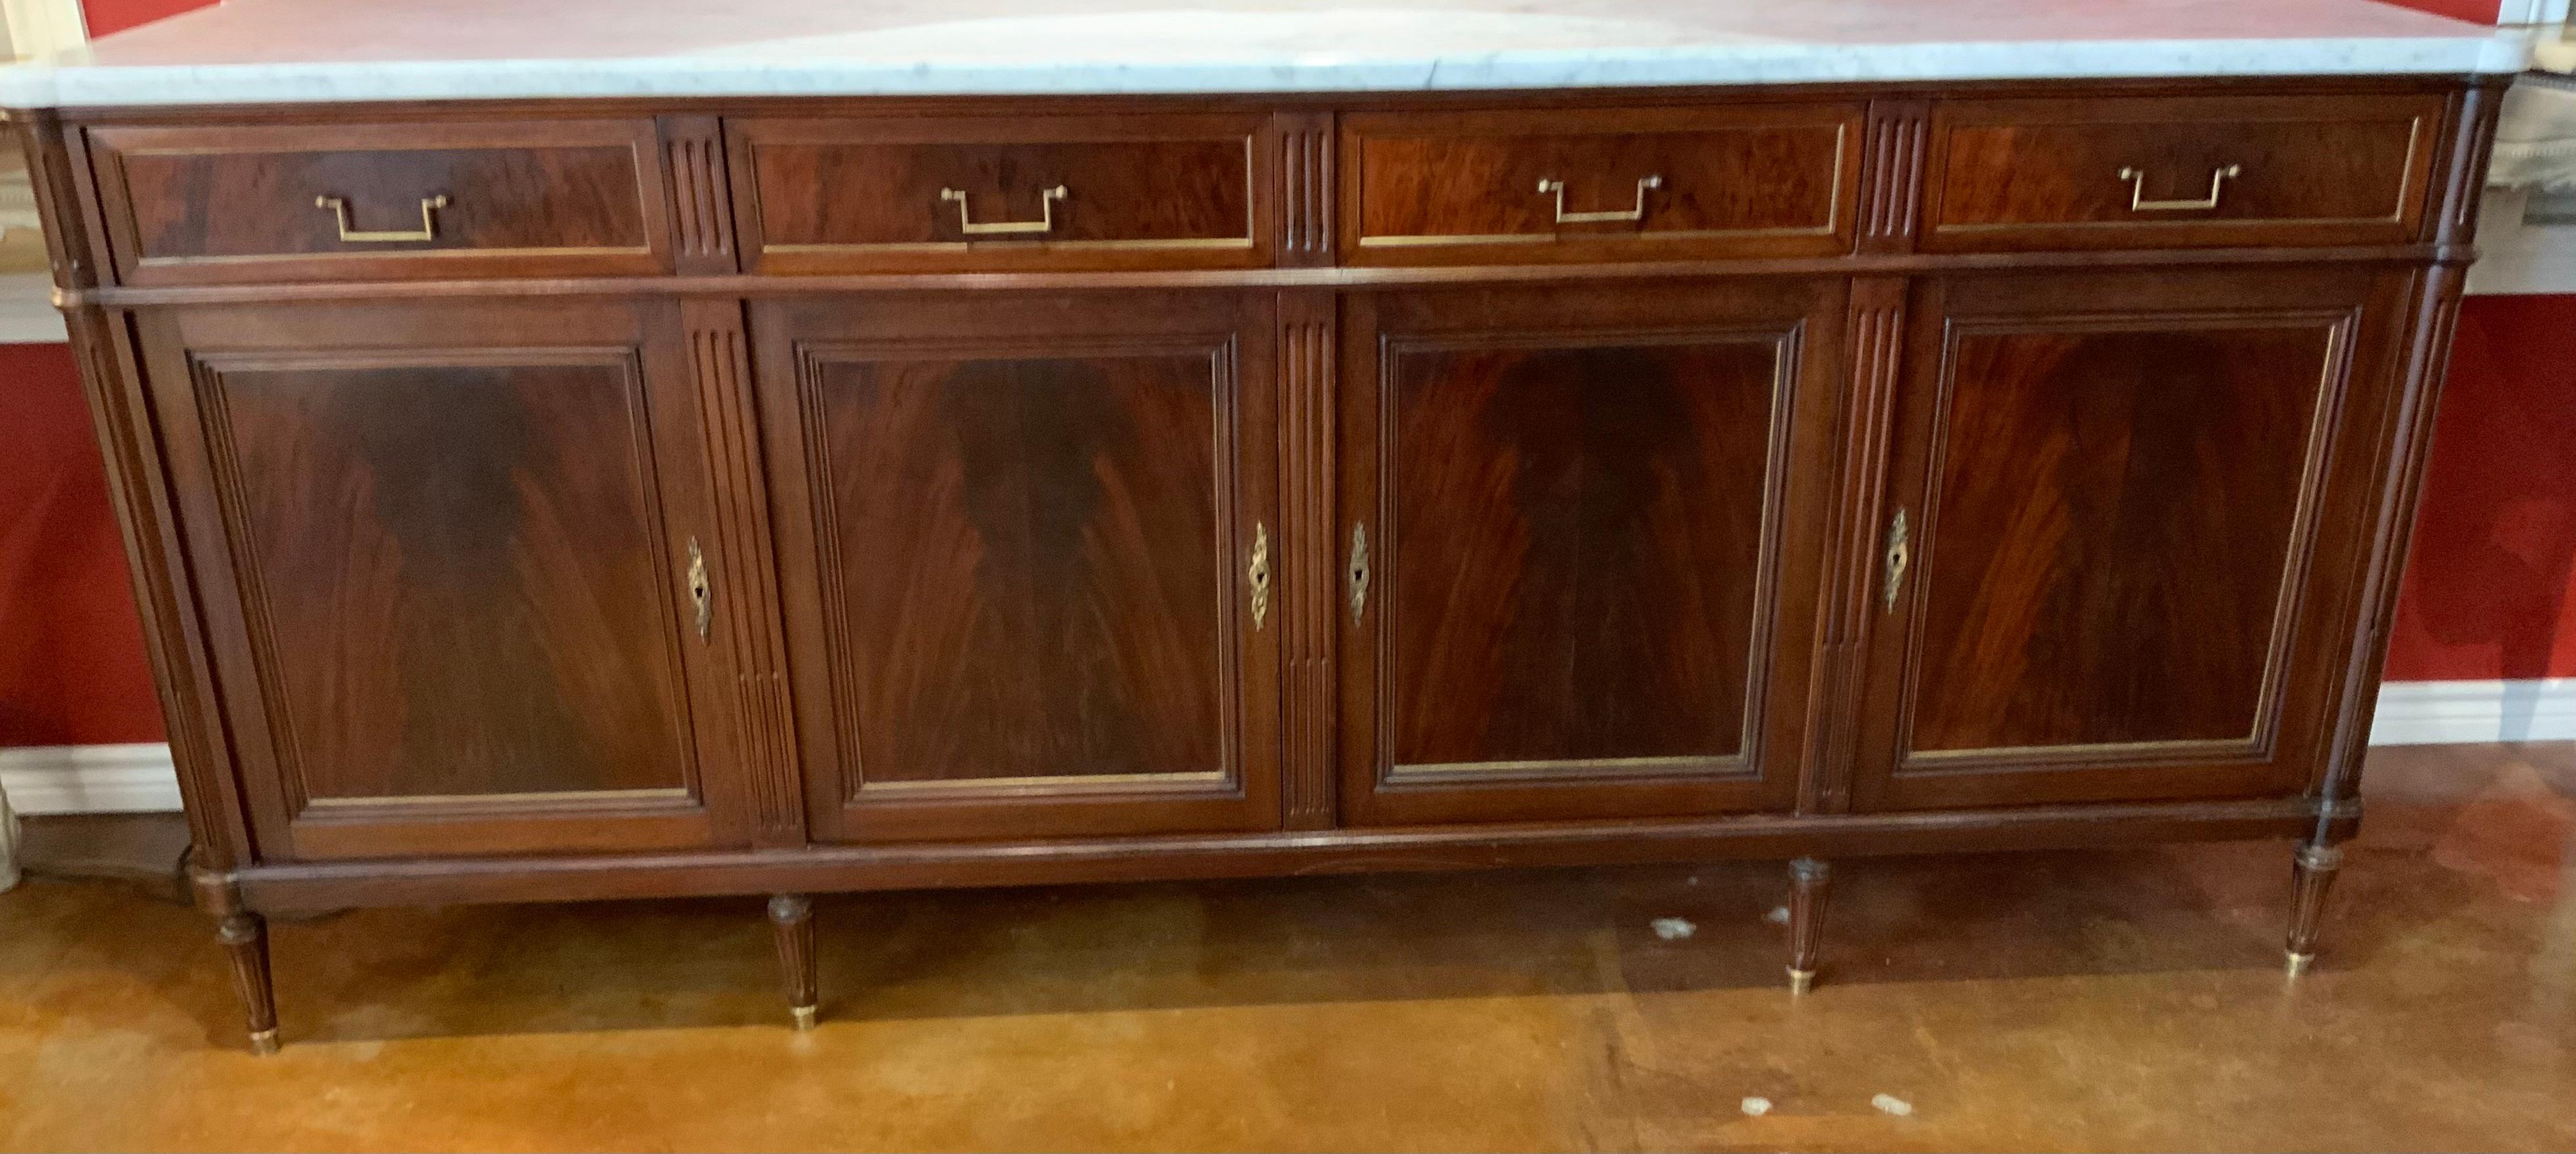 Louis XVI-Style sideboard/buffet mahogany with white marble top For Sale 3